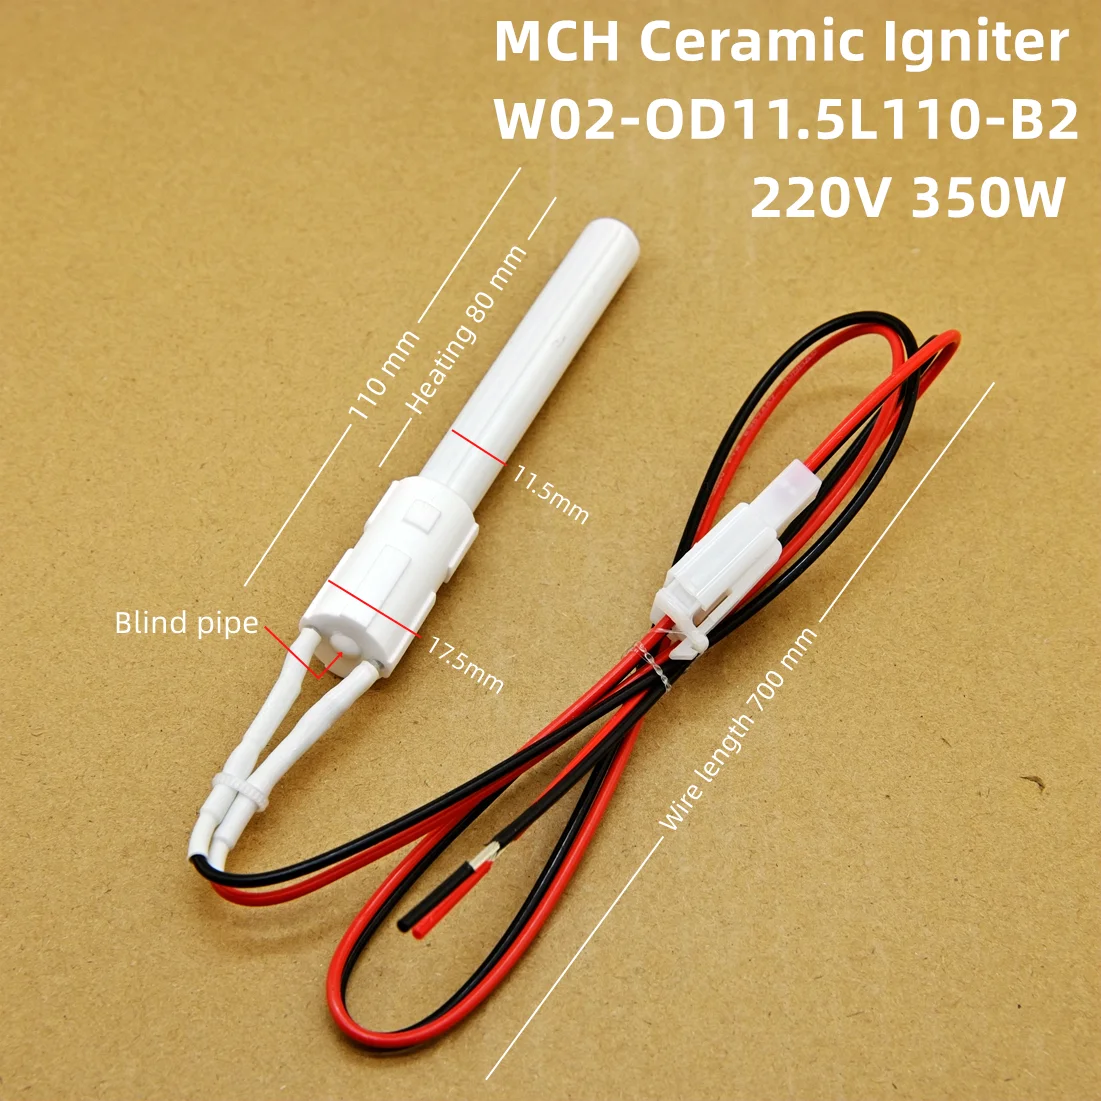 220V 350W Ceramic Igniter,pellet barbecue stove heating furnace Ignition rod, internal and external insulation, safe and env